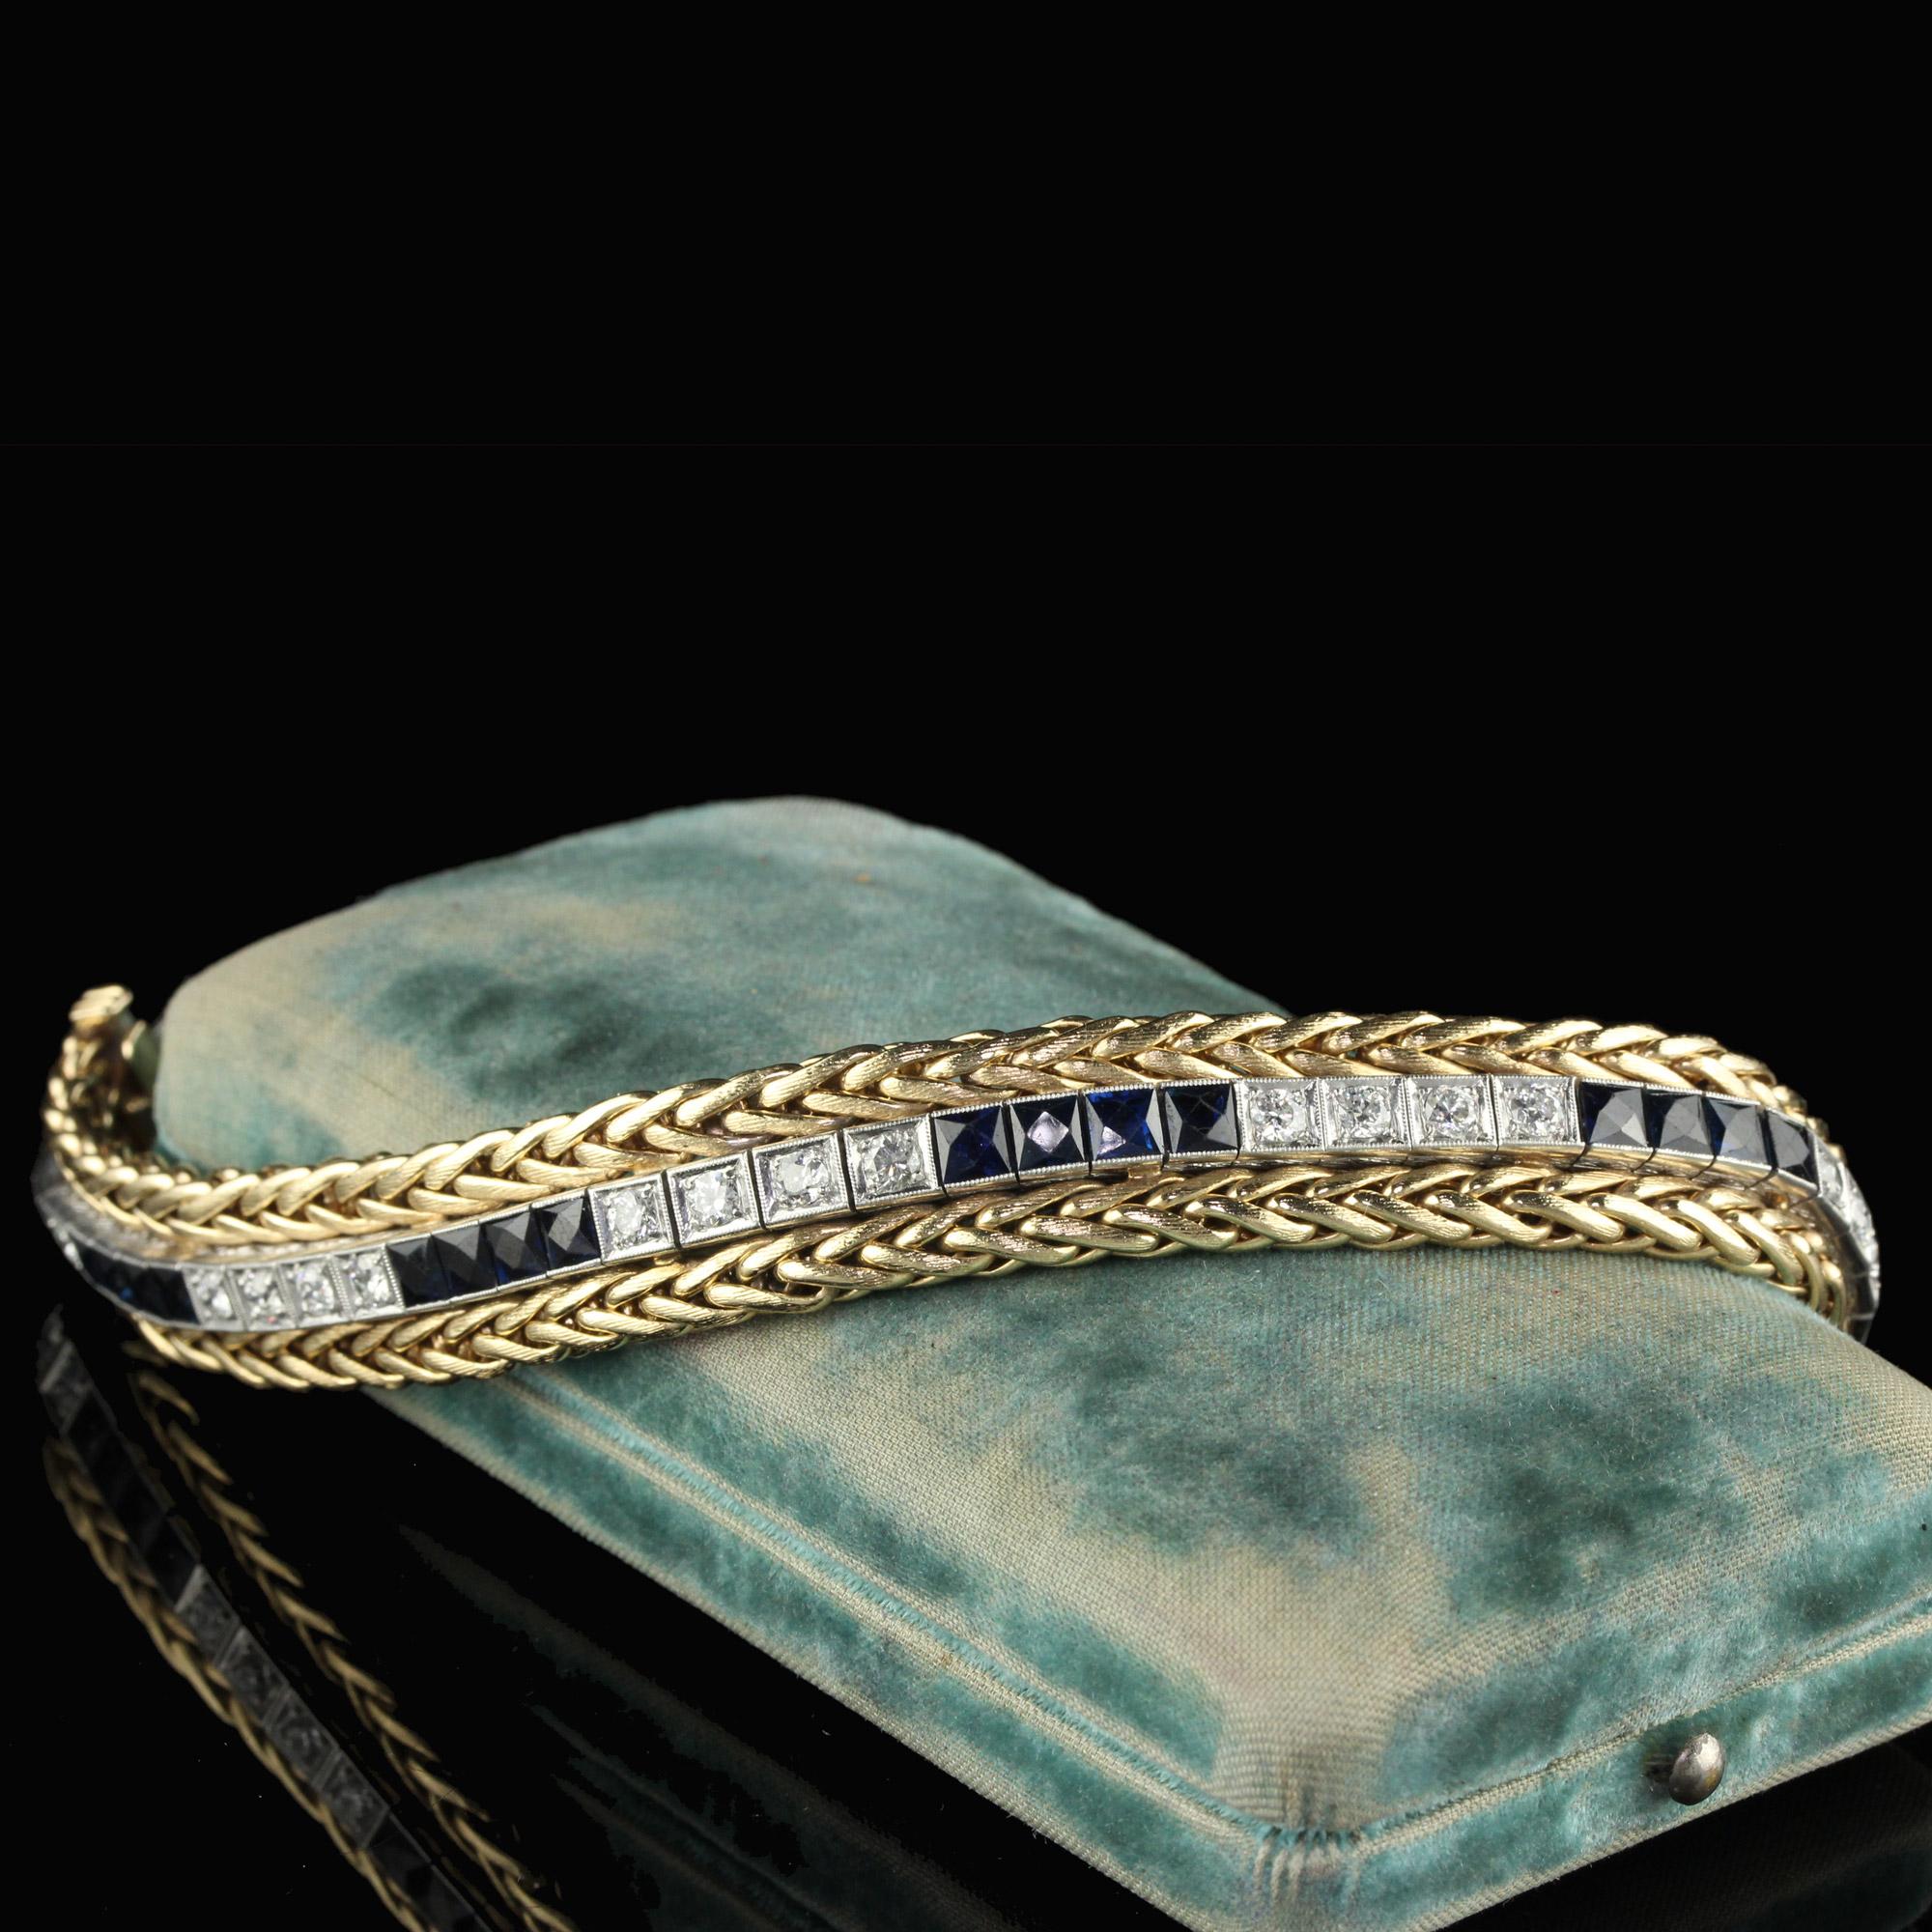 Beautiful Antique Art Deco 14K Yellow Gold Platinum Old Euro French Cut Sapphire Line Bracelet. This gorgeous bracelet is crafted in 14k yellow gold and platinum. The bracelet is a conversion of an Art Deco line bracelet that has natural old